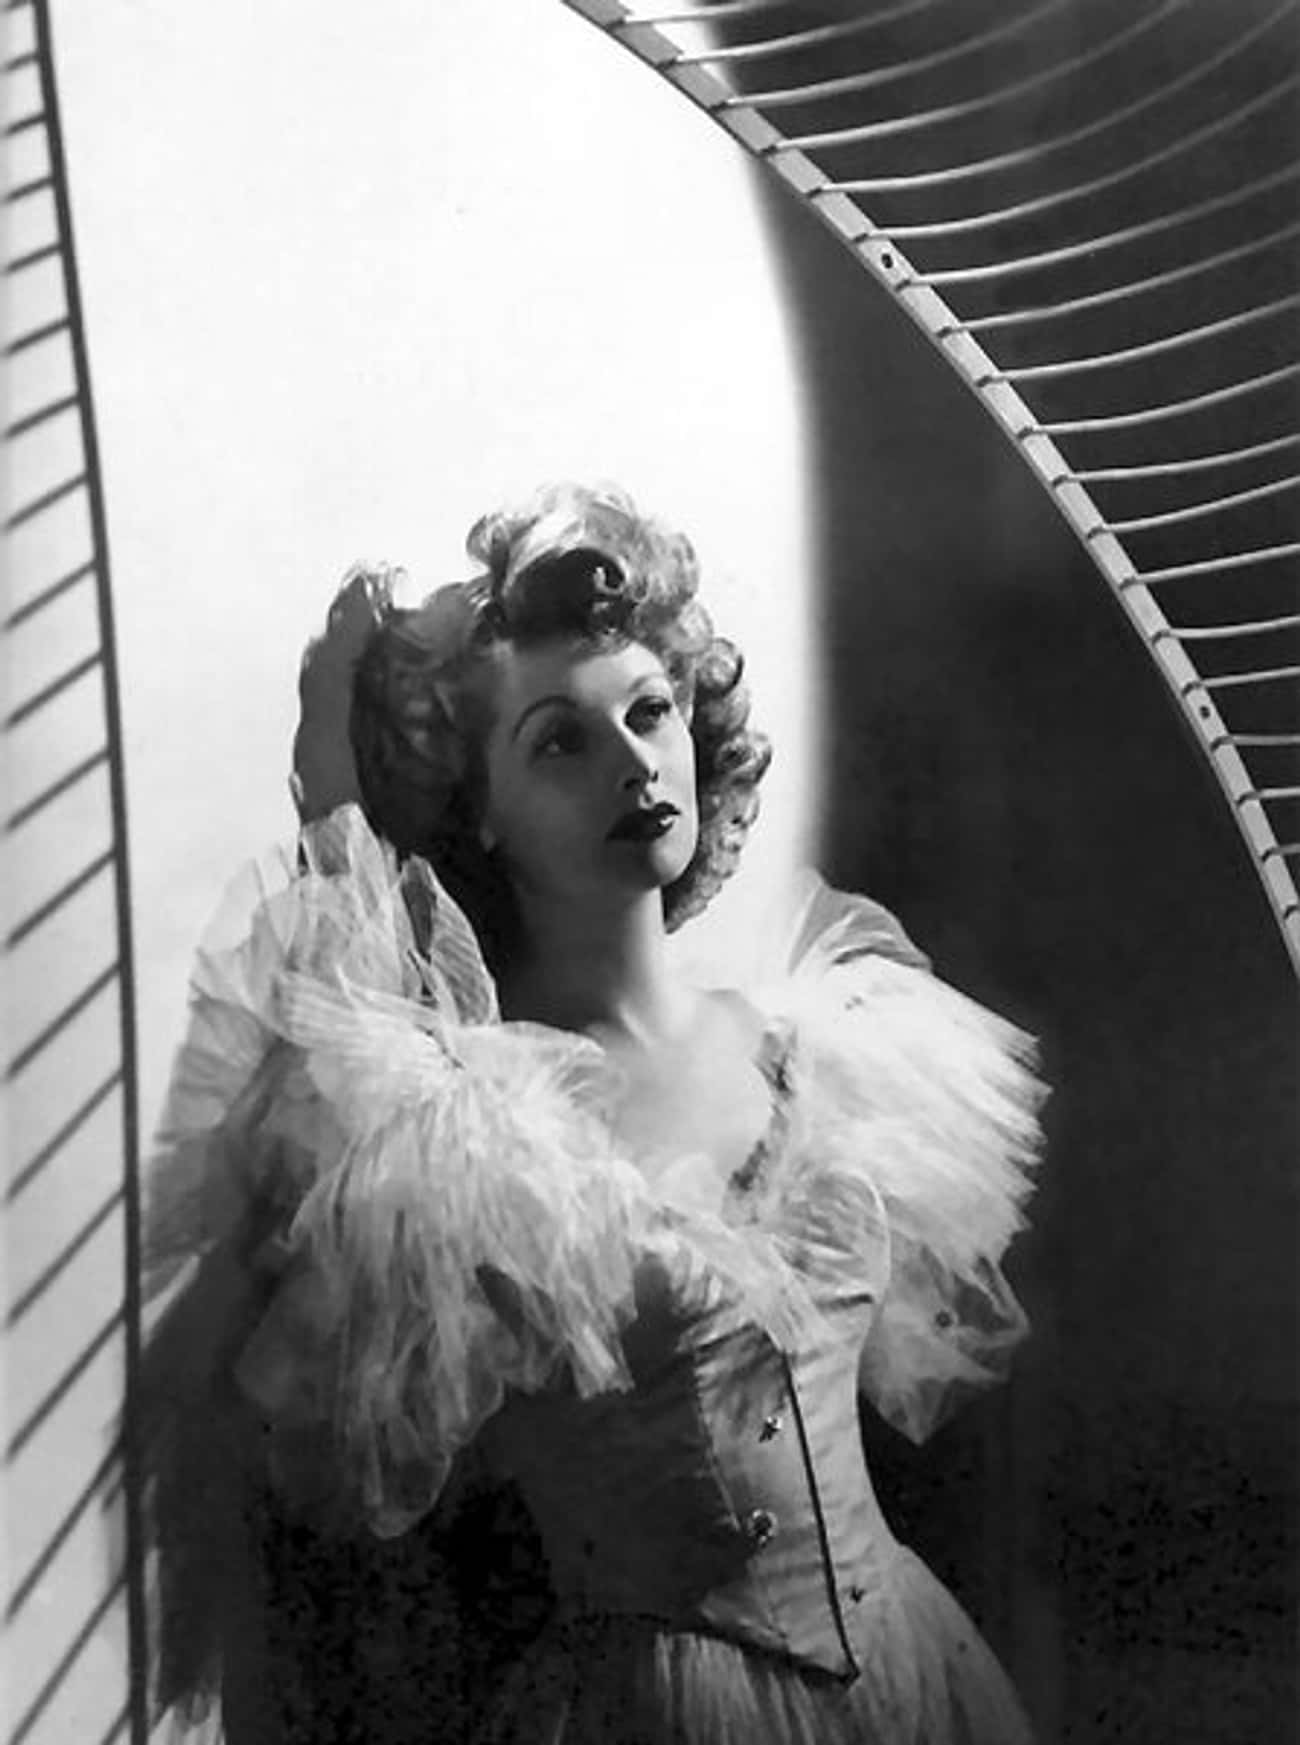 Young Lucille Ball in Elegant Dress with White Lace Collar